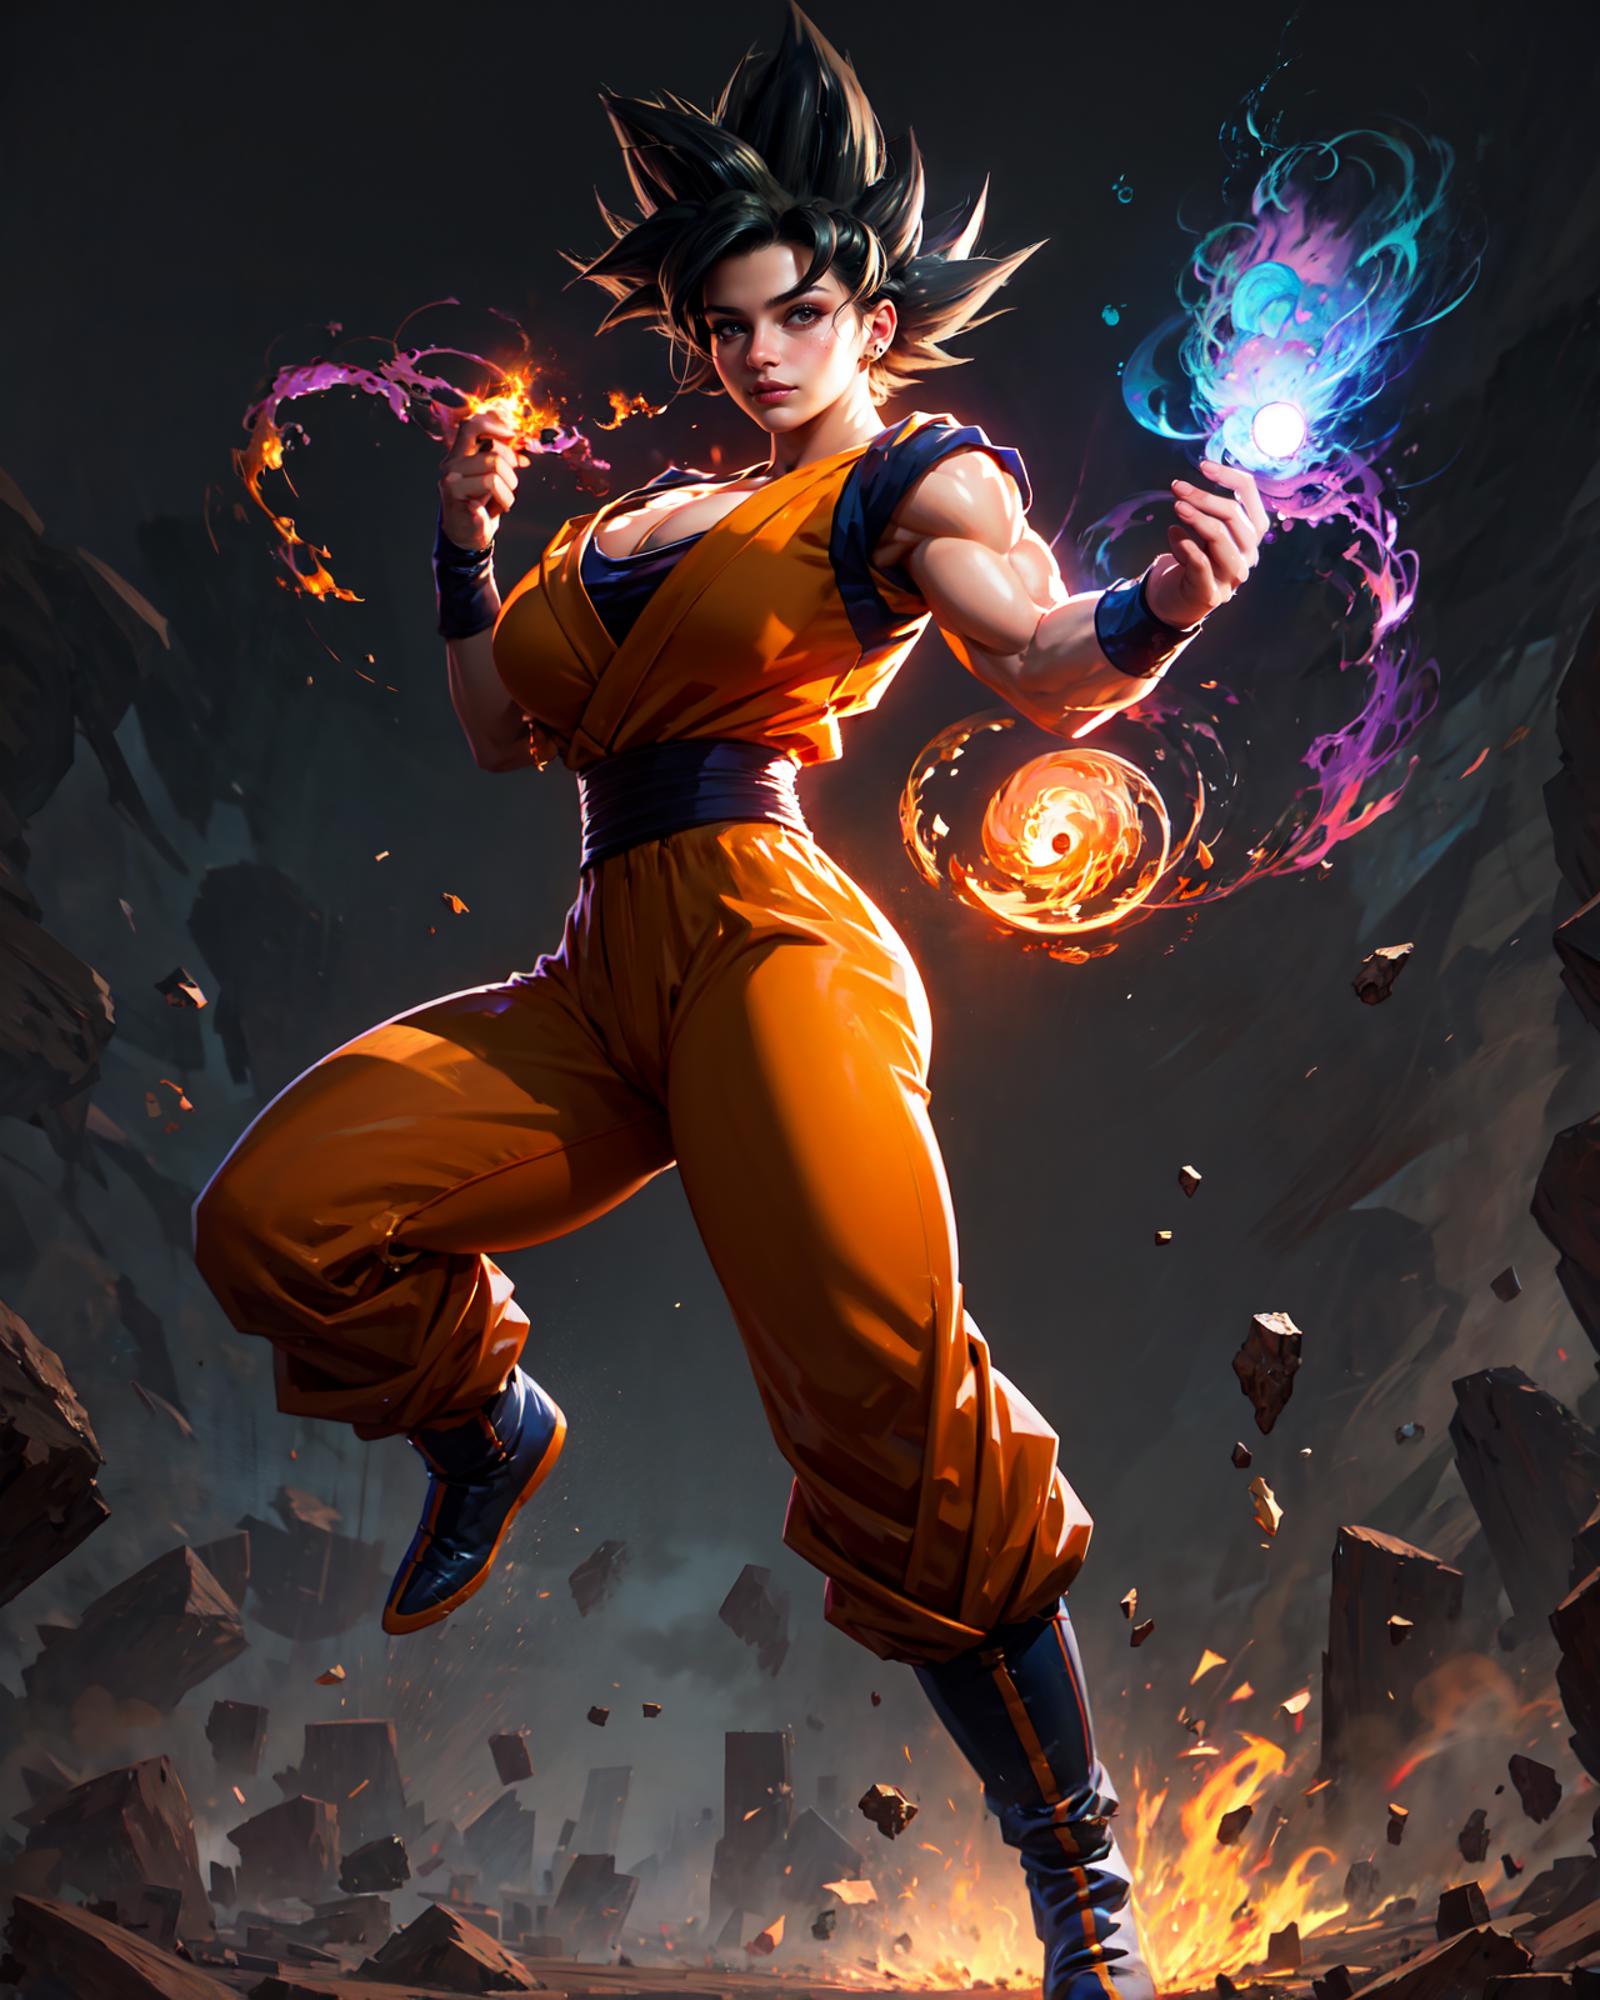 Son Goku's "Turtle School Uniform" Outfit or Default | Clothing LoRA image by MrHong